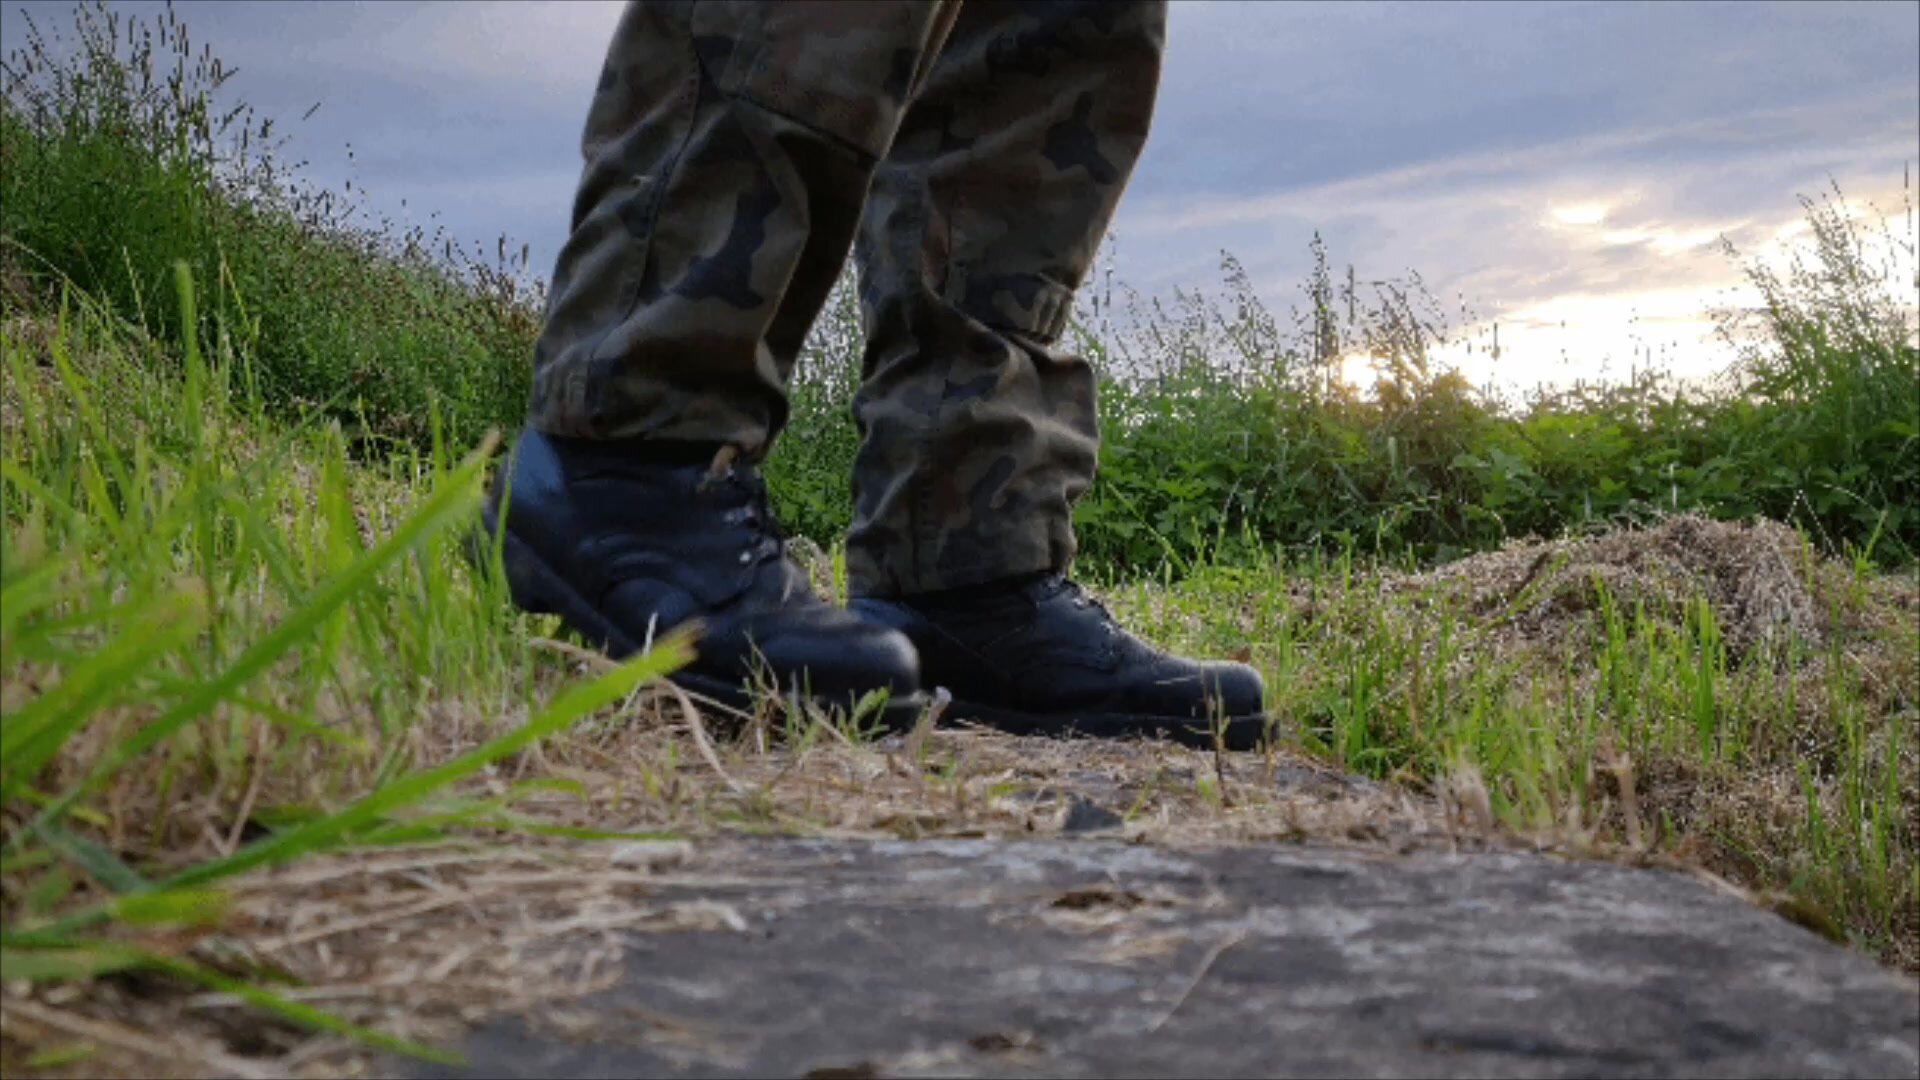 Military boots walking